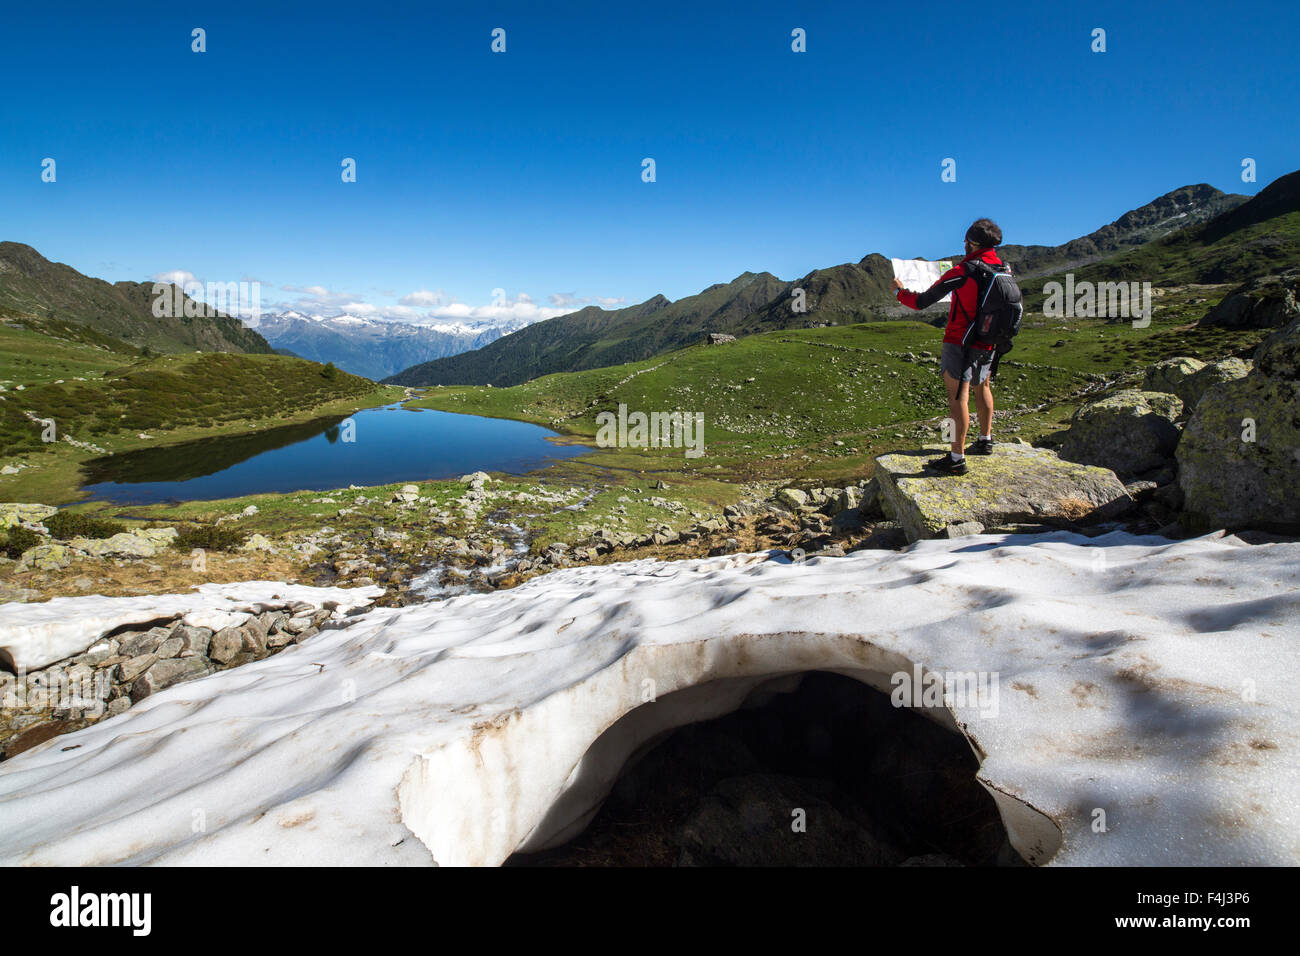 Hiker at Lakes Porcile, Tartano Valley, Orobie Alps, Lombardy, Italy, Europe Stock Photo